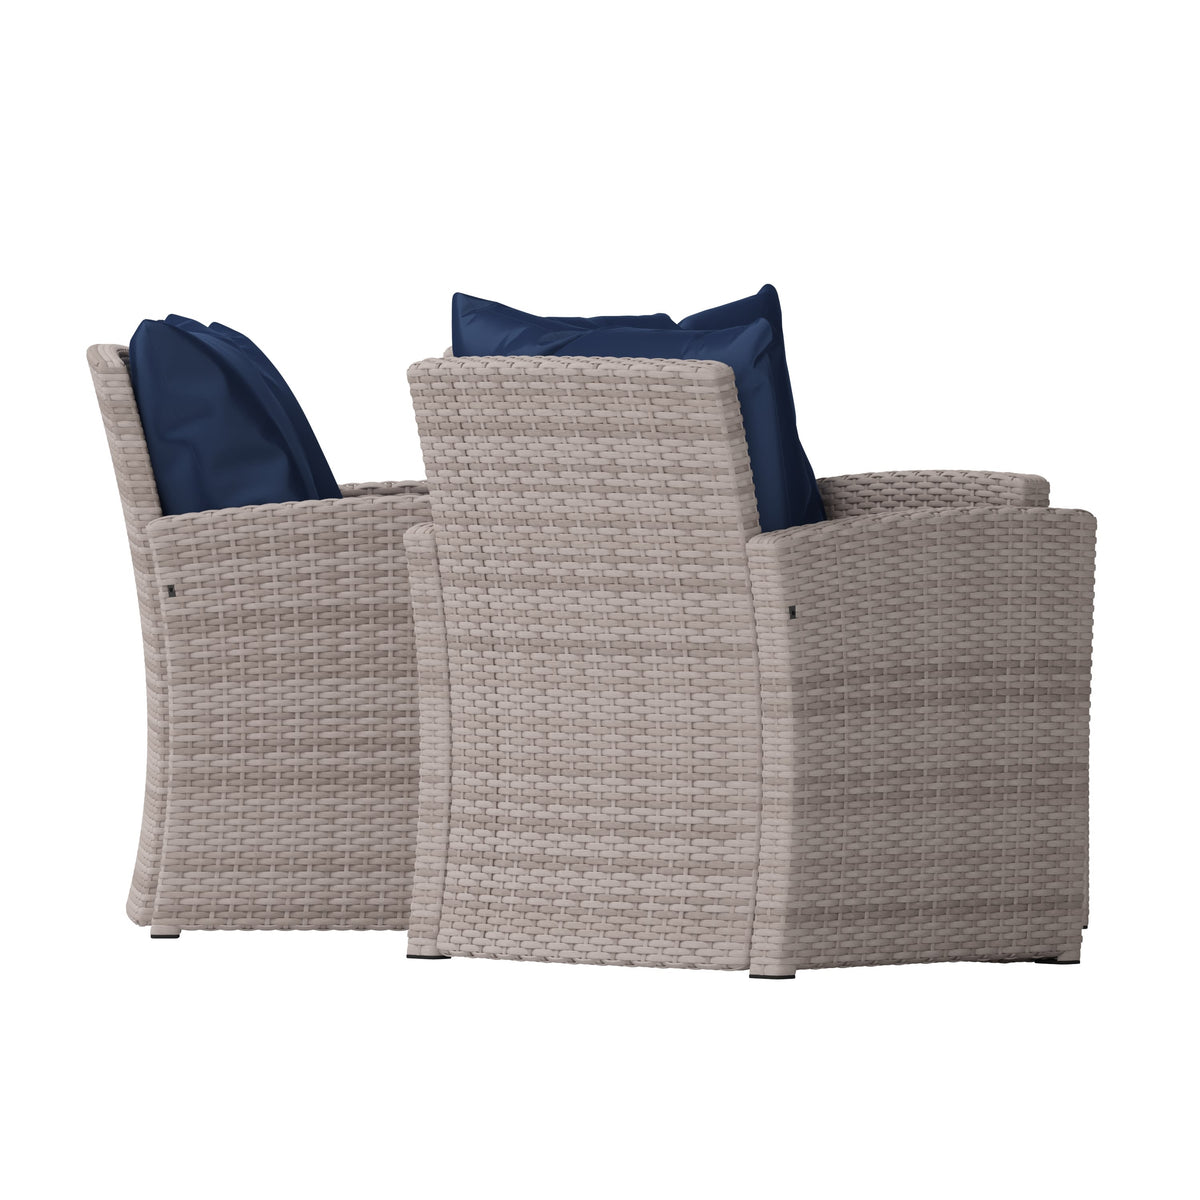 Navy Cushions/Light Gray Frame |#| 4 PC Lt Gray Patio Set with Navy Back Pillows & Seat Cushions - Outdoor Seating